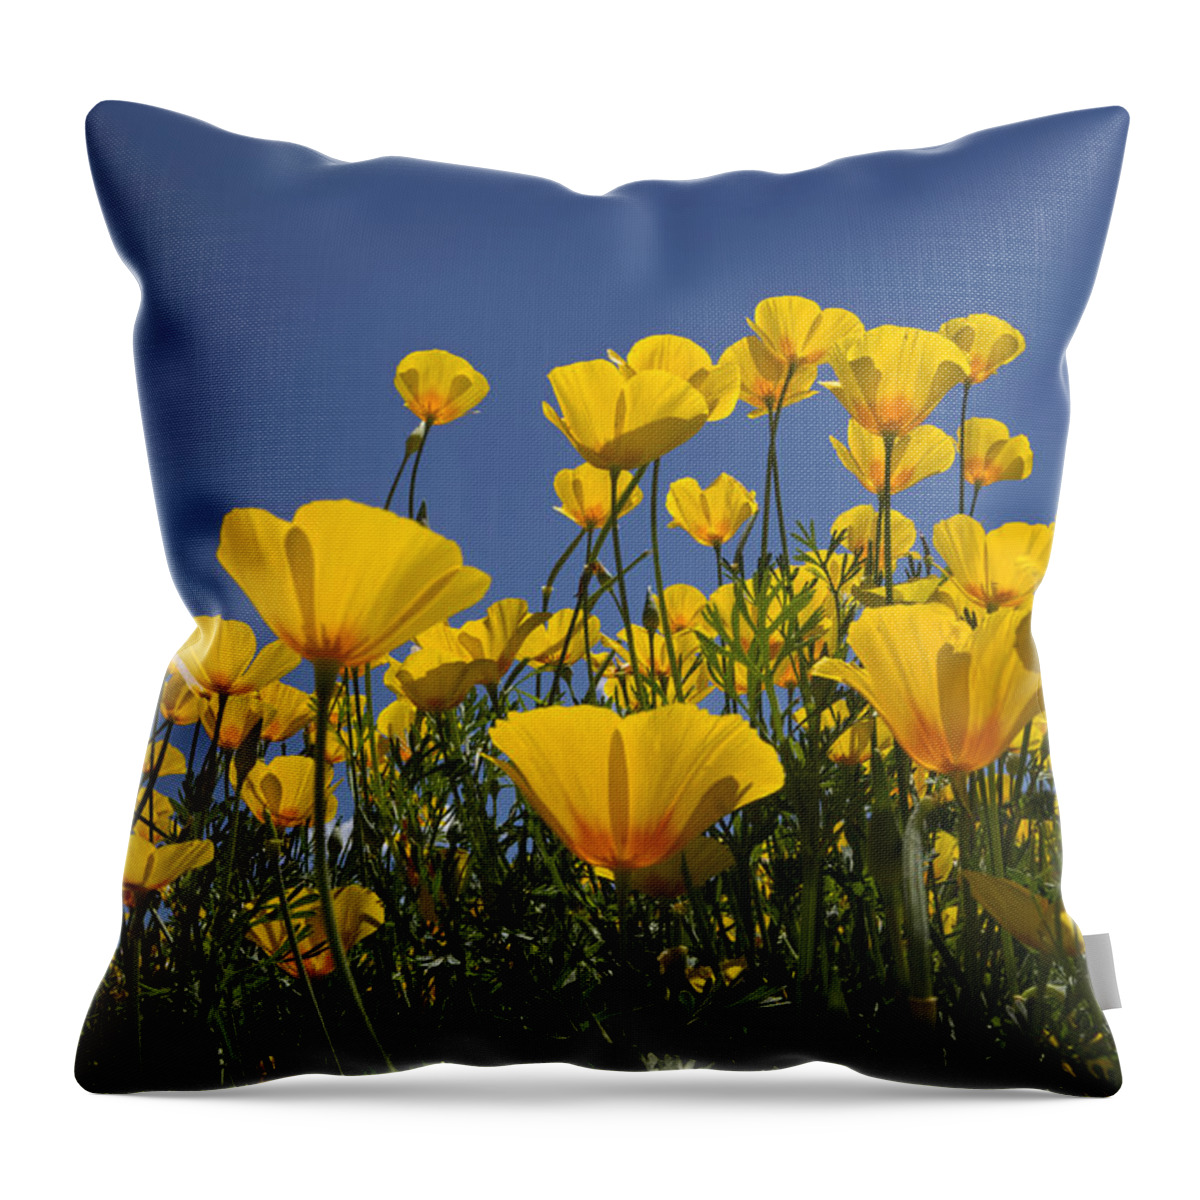 Face Mask Throw Pillow featuring the photograph A Little Sunshine by Lucinda Walter